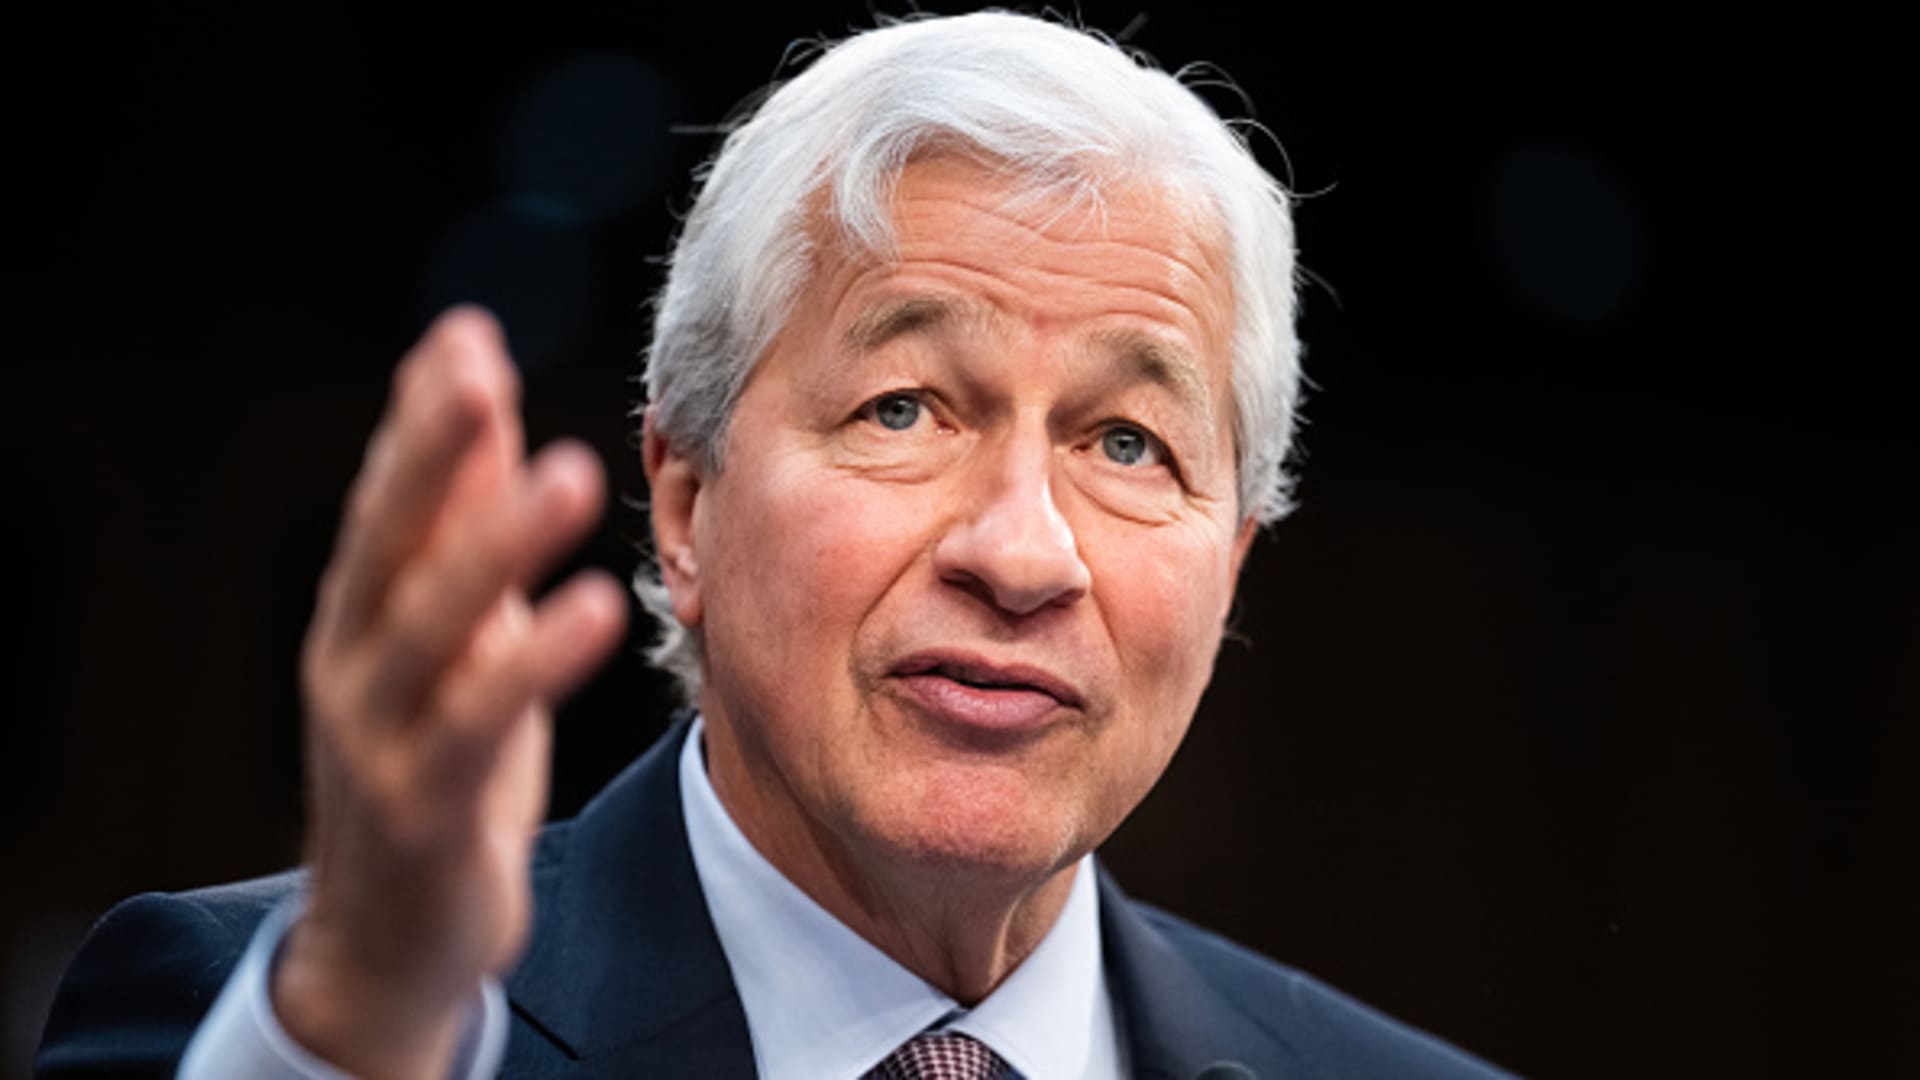 JPMorgan Chase is set to report fourth-quarter earnings.  Here's what the Street expects